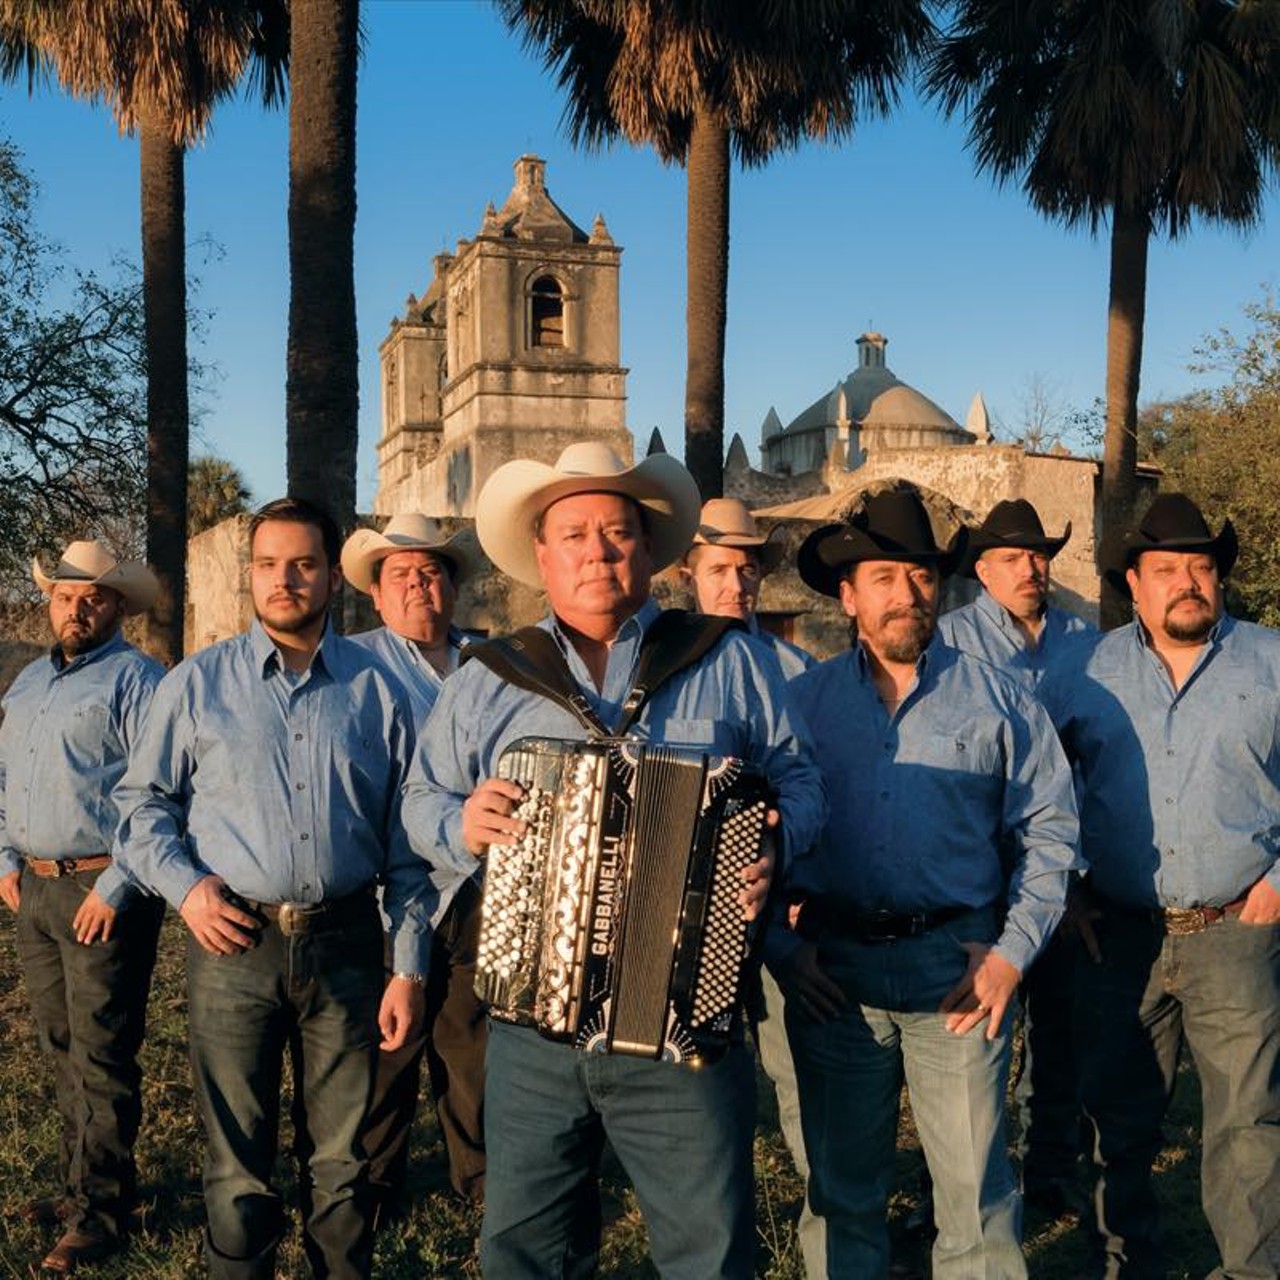 You’re likely bumping Tejano tunes at any given time.
Especially if it’s on the weekend, David Lee Garza y Los Musicales is likely blasting as you drink on your patio or barbecue in the backyard.
Photo via Facebook / David Lee Garza y los Musicales